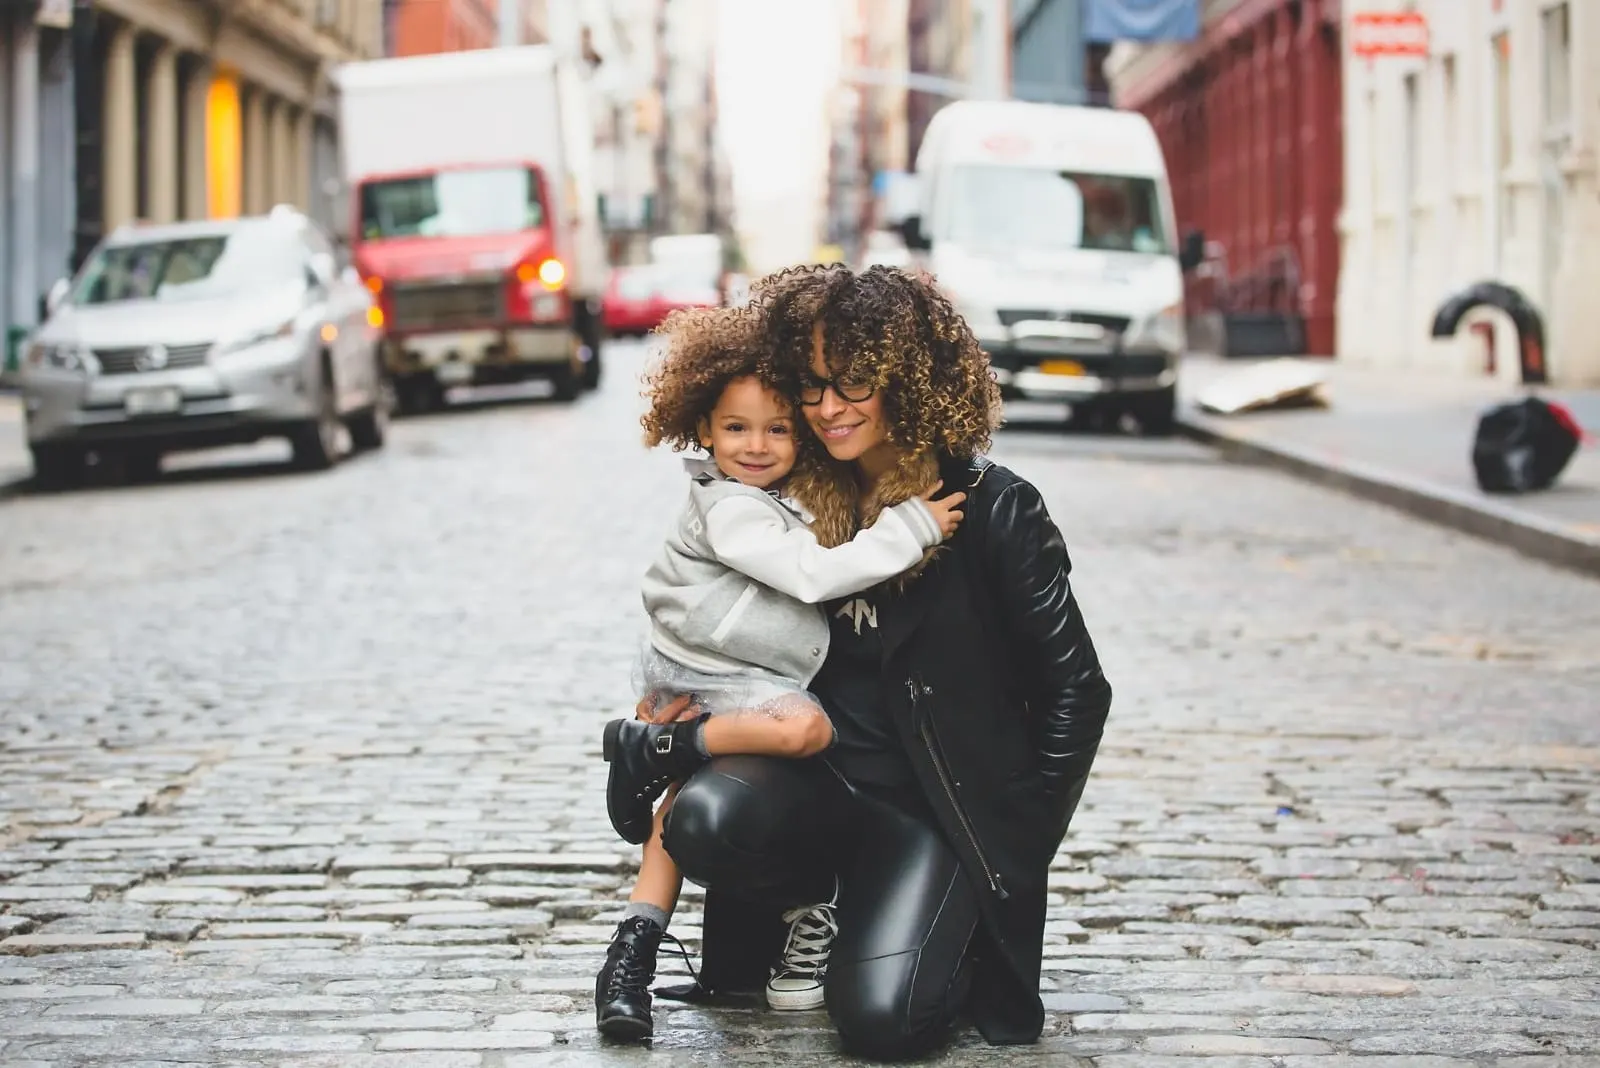 woman with curly hair holding girl on the street